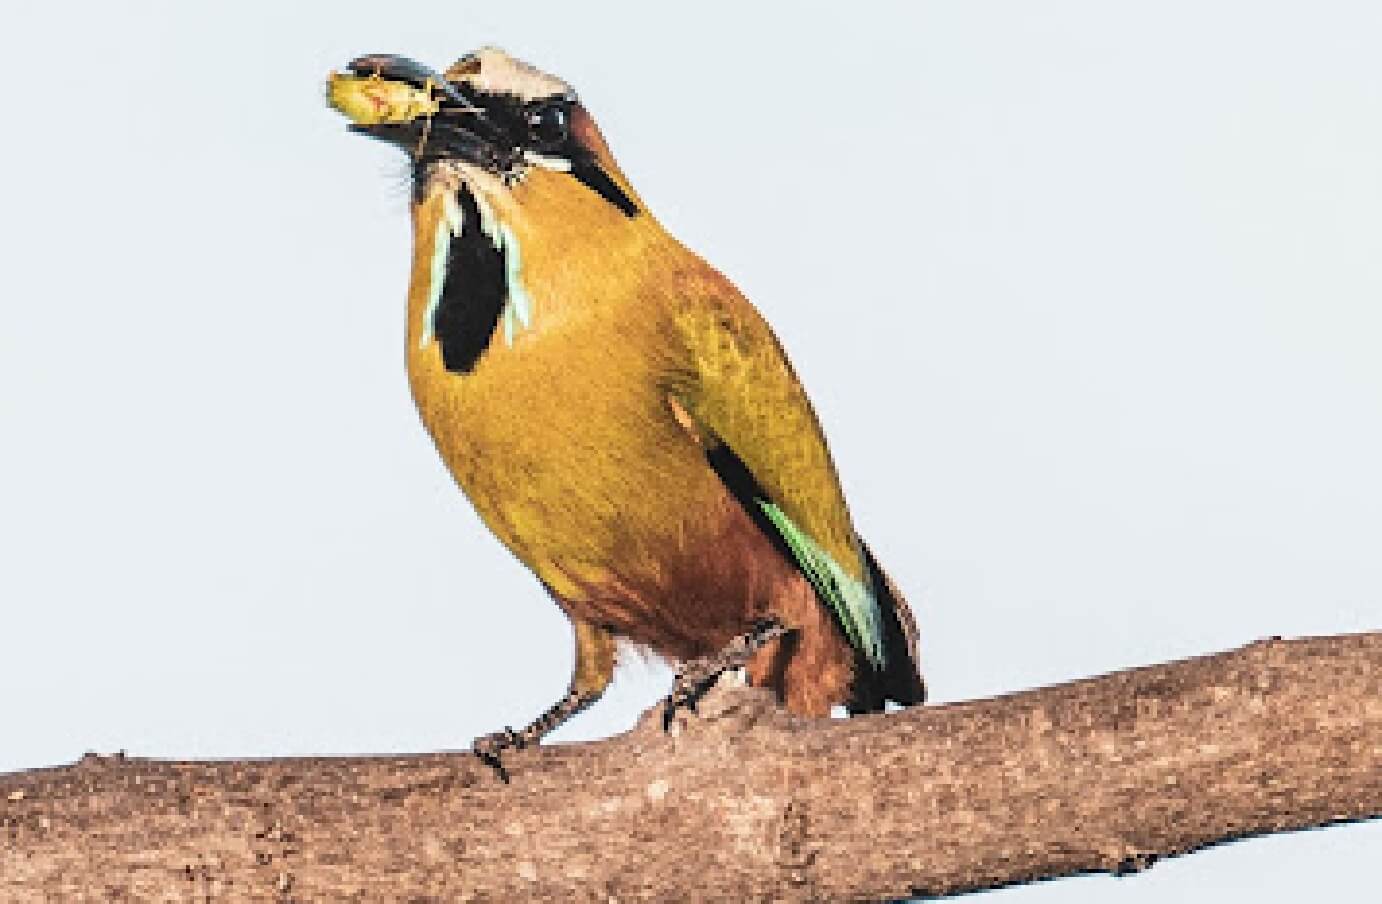 Motmot holding some food in its mouth, perched on a tree